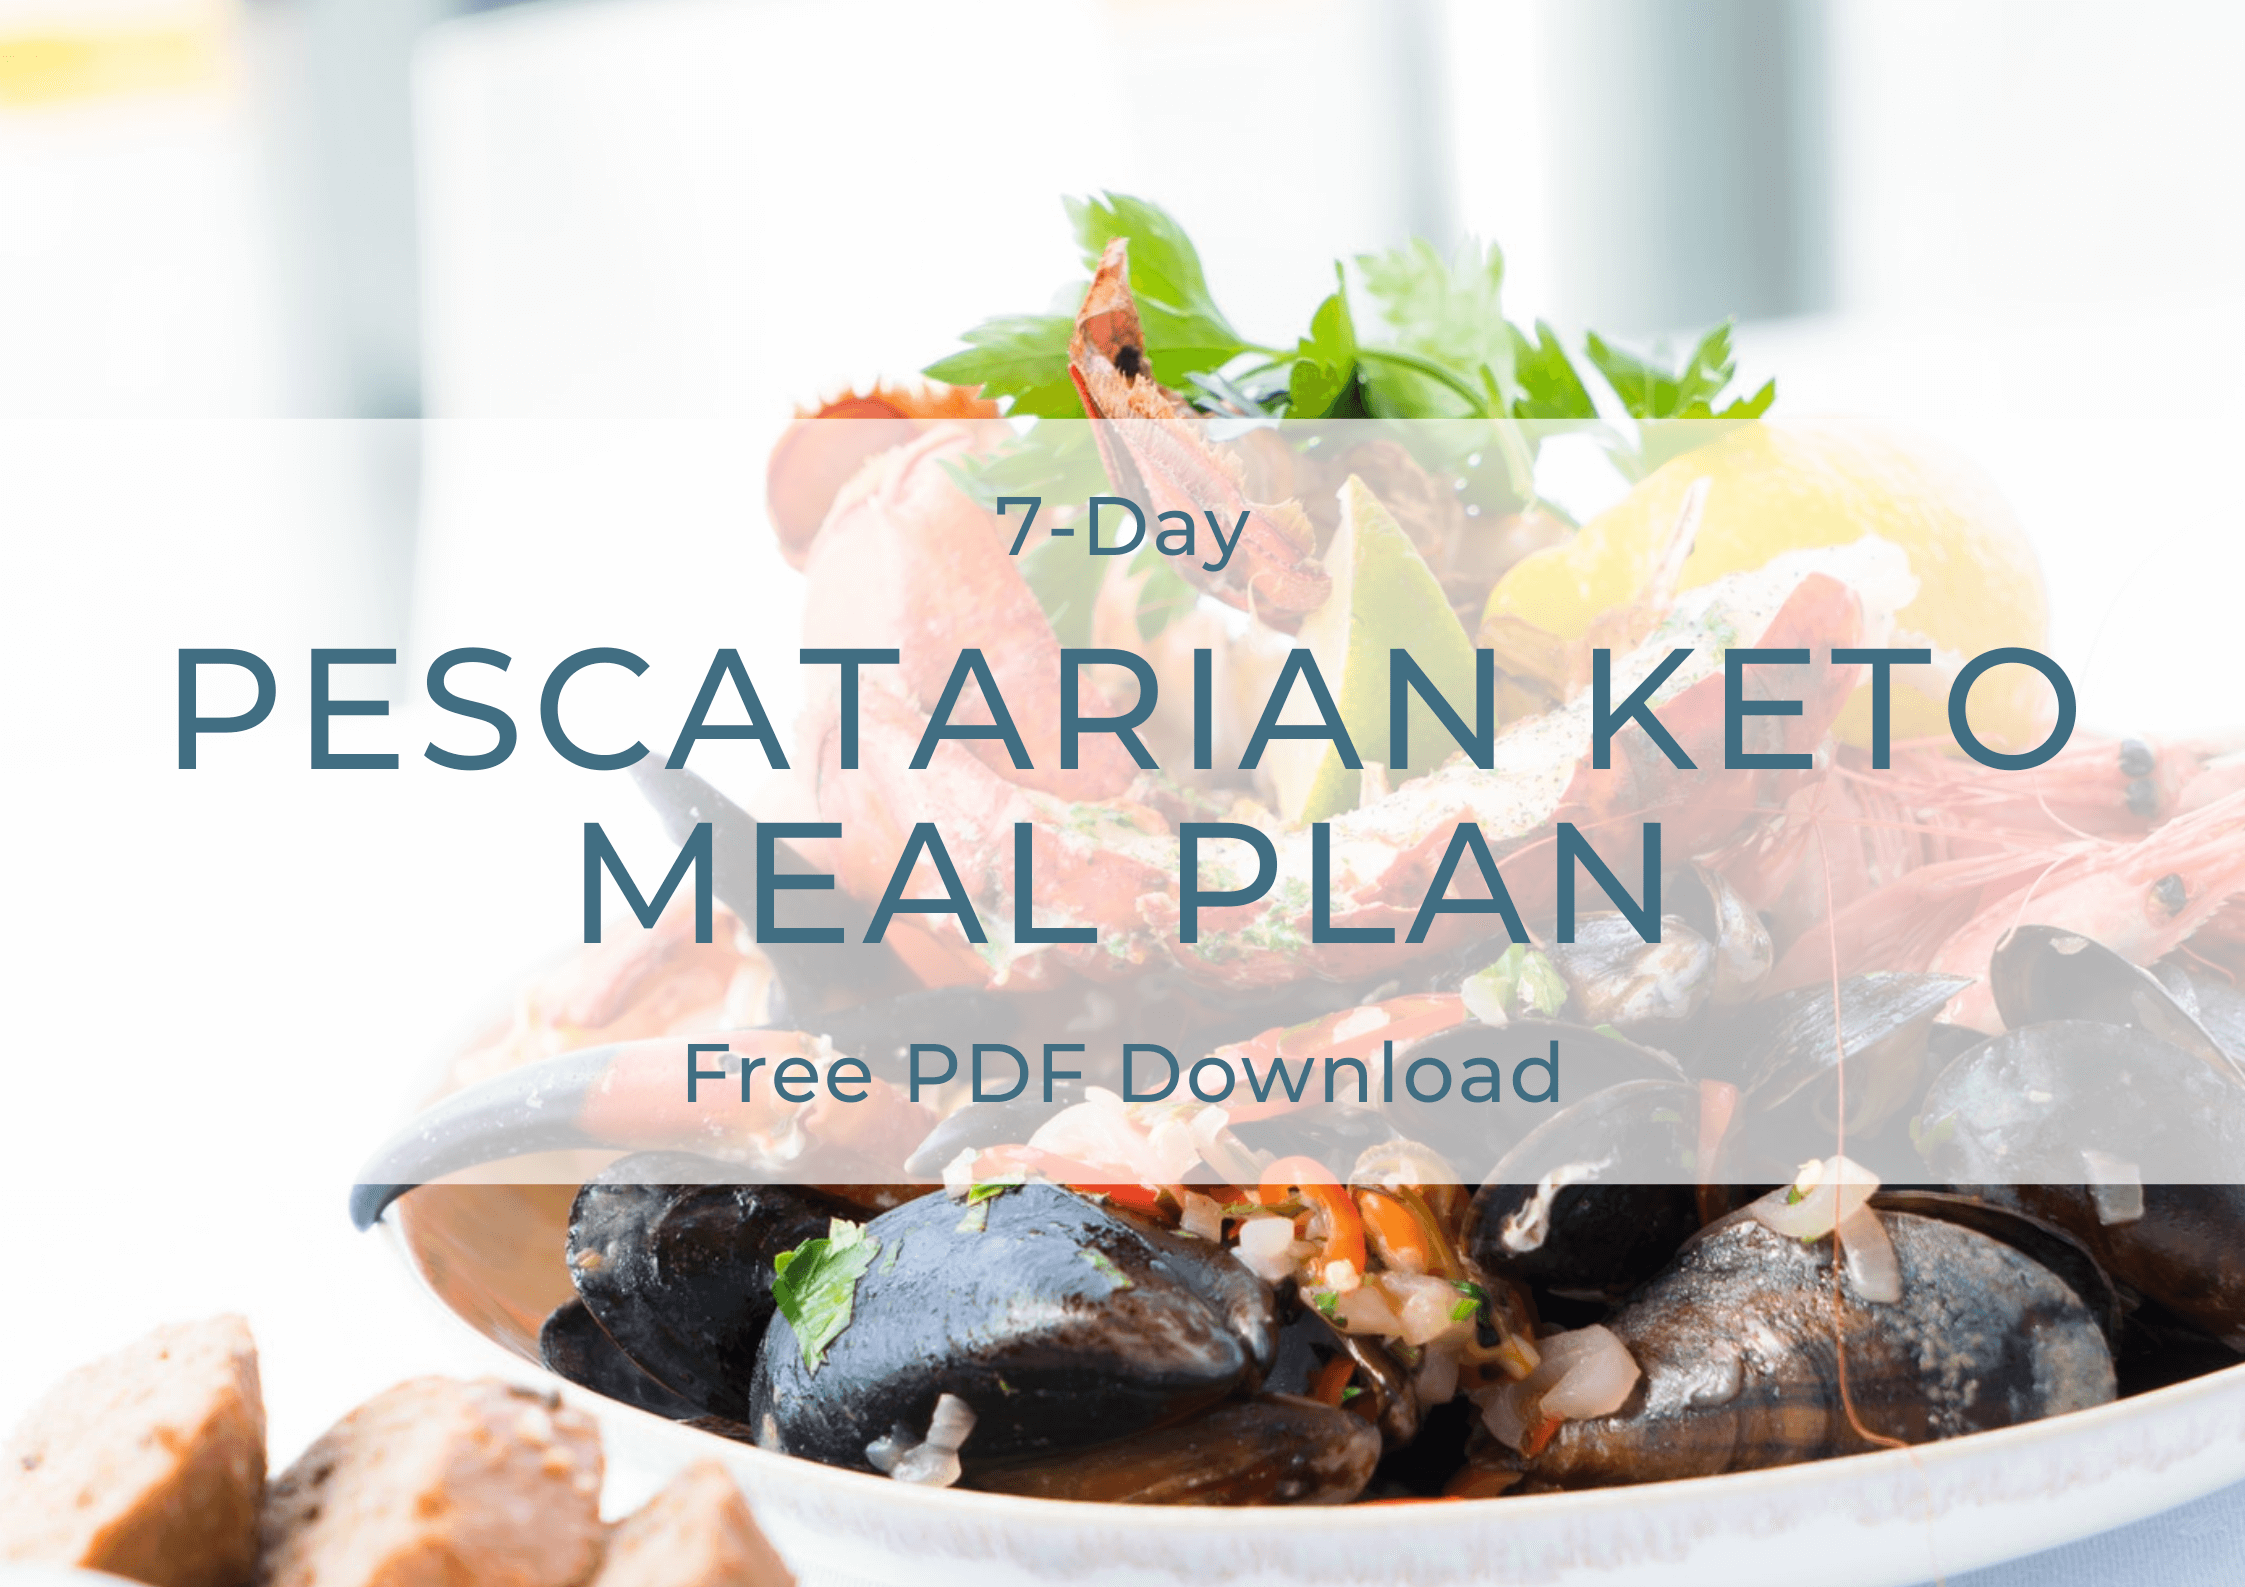 Pescatarian Keto Diet: Definition, Food List, And Meal Plan